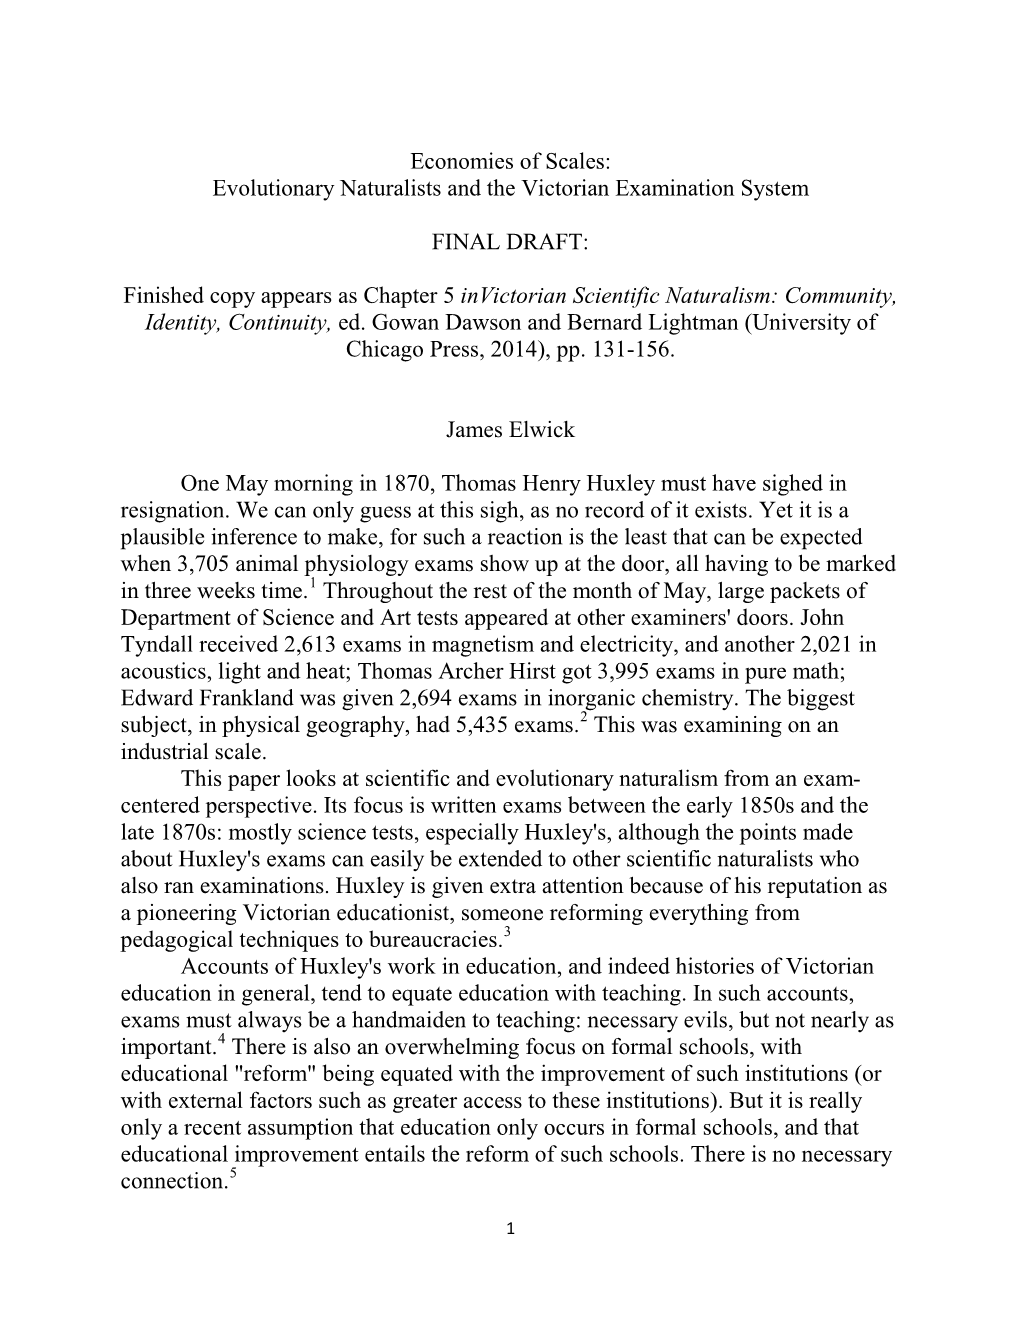 Economies of Scales: Evolutionary Naturalists and the Victorian Examination System